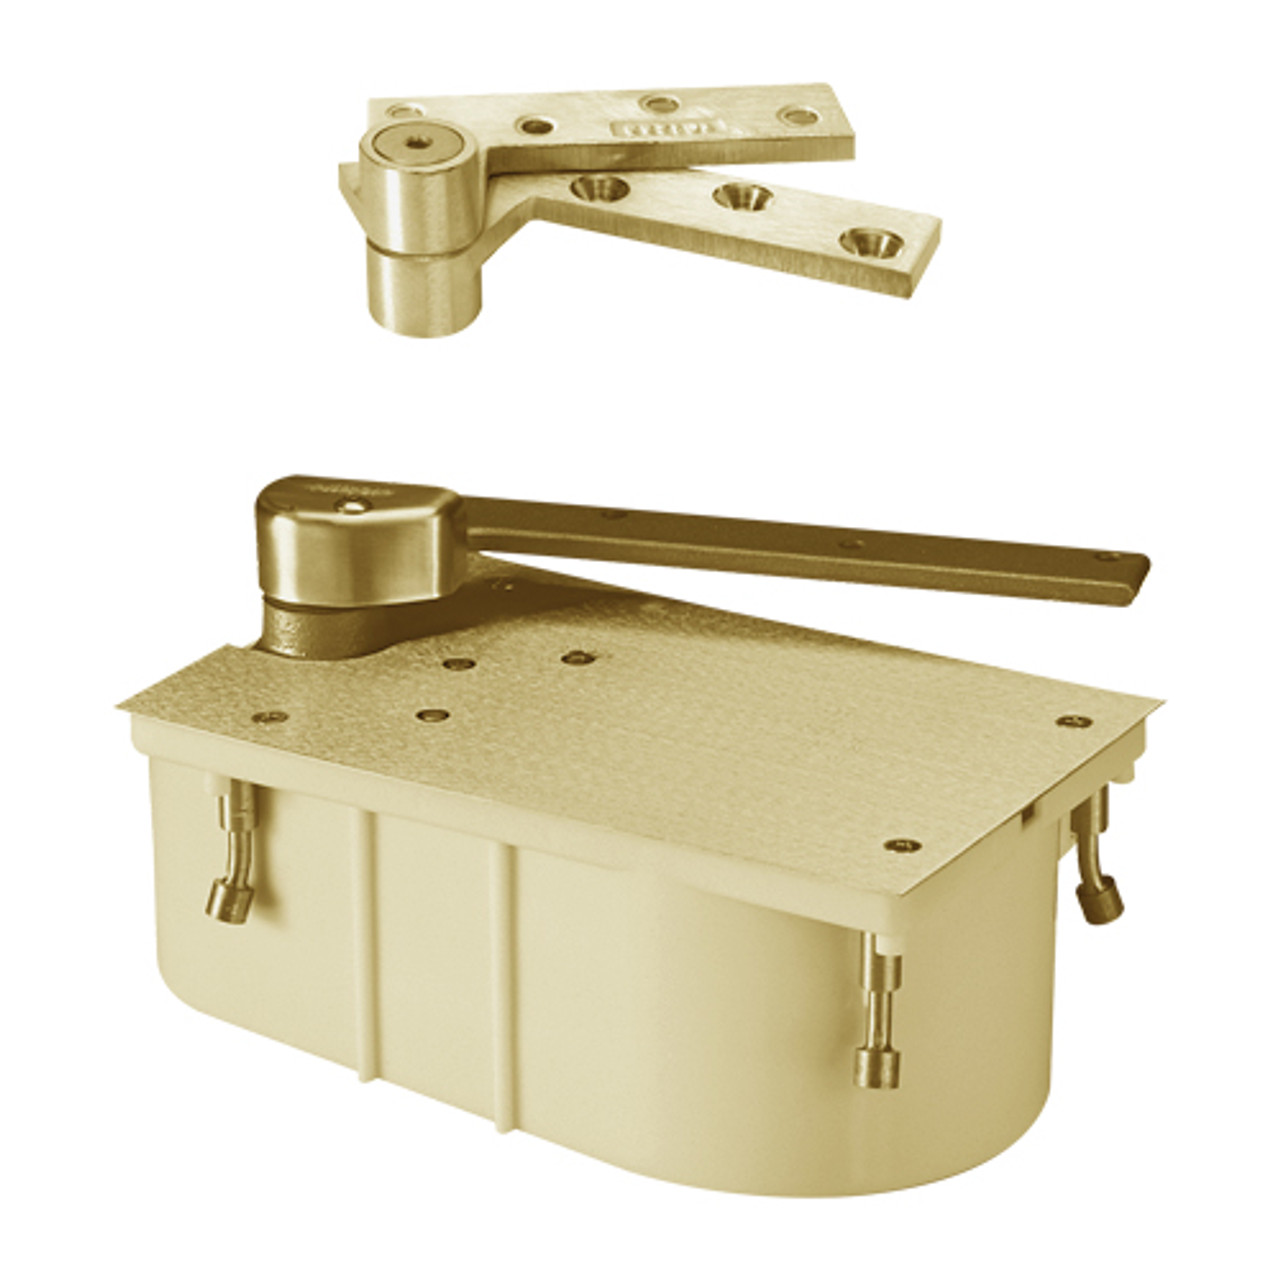 27-90S-CWF-LH-606 Rixson 27 Series Heavy Duty 3/4" Offset Hung Floor Closer in Satin Brass Finish